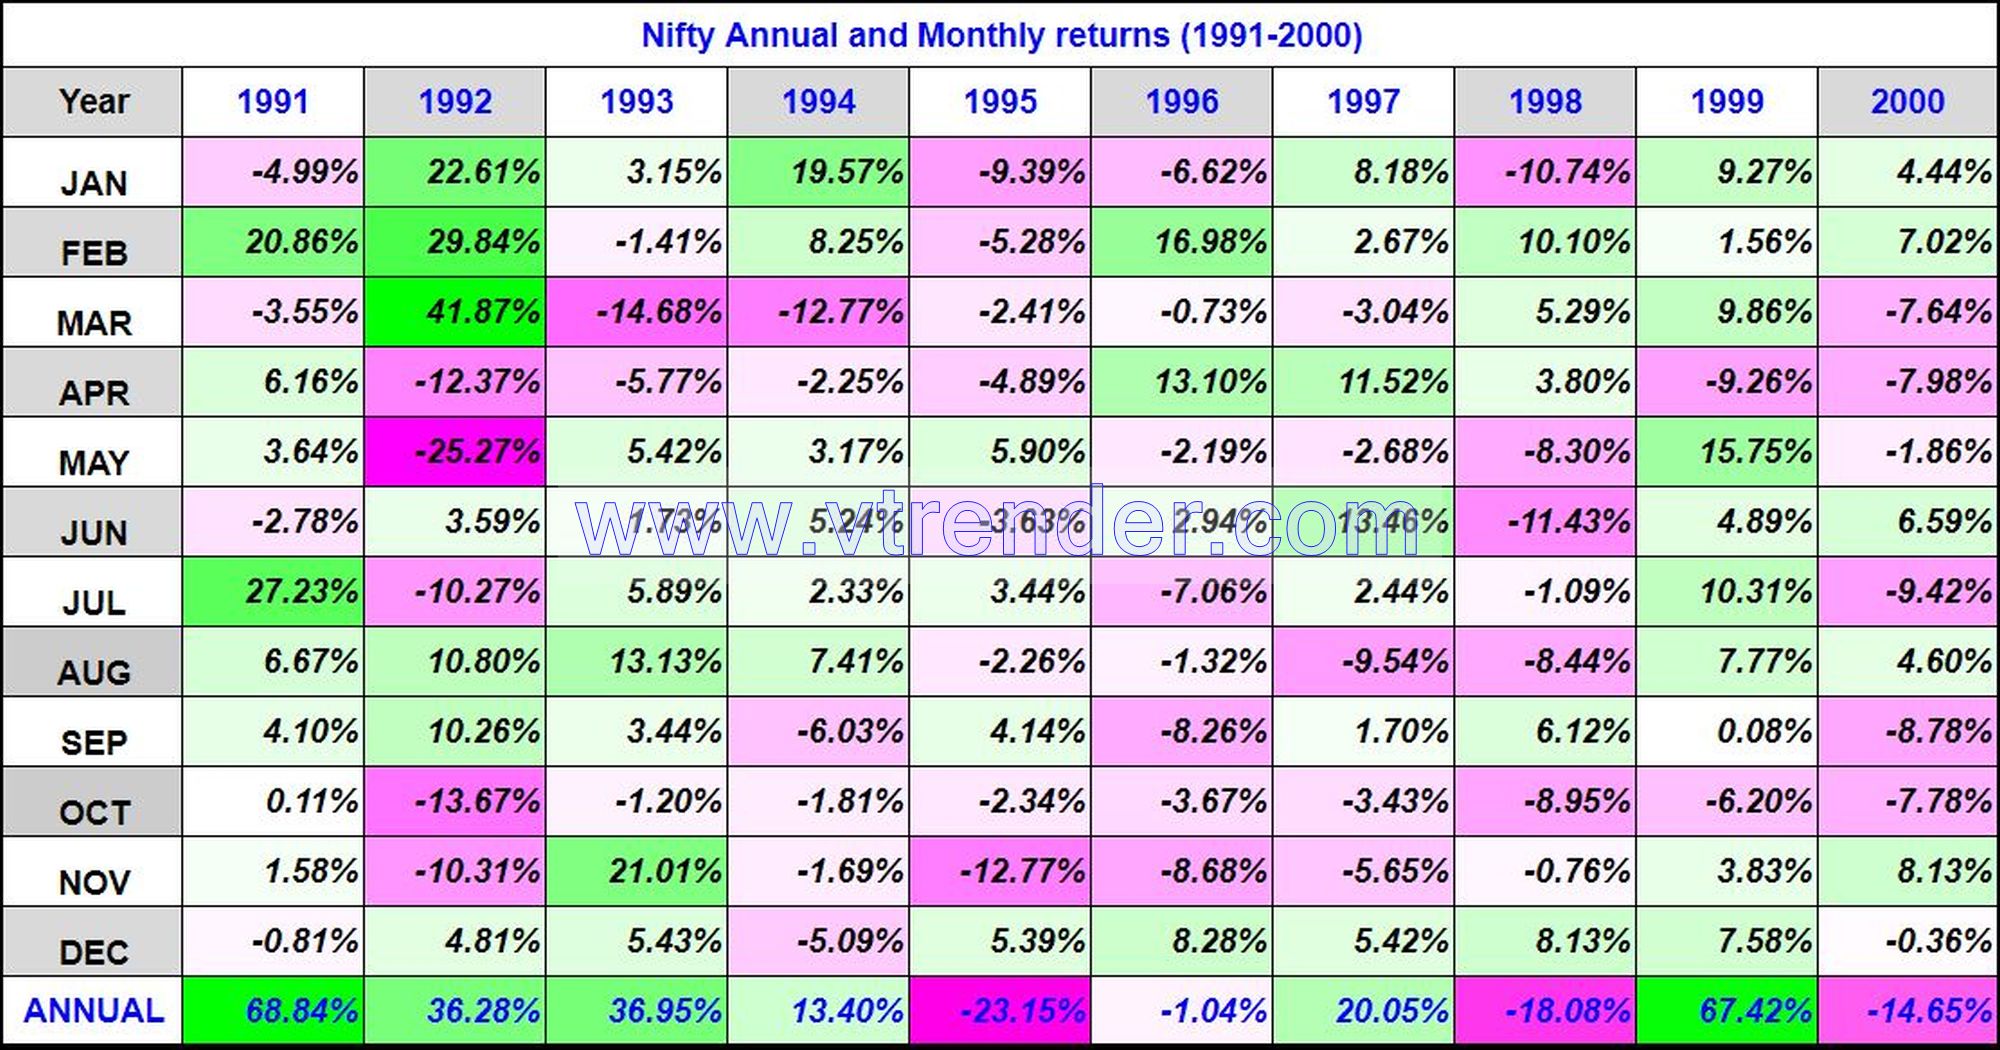 Niftyreturns1991 2000 Nifty 50 Monthly And Annual Returns (1991-2022) - 26Th Aug 2022 Annual, Monthly, Nifty Returns